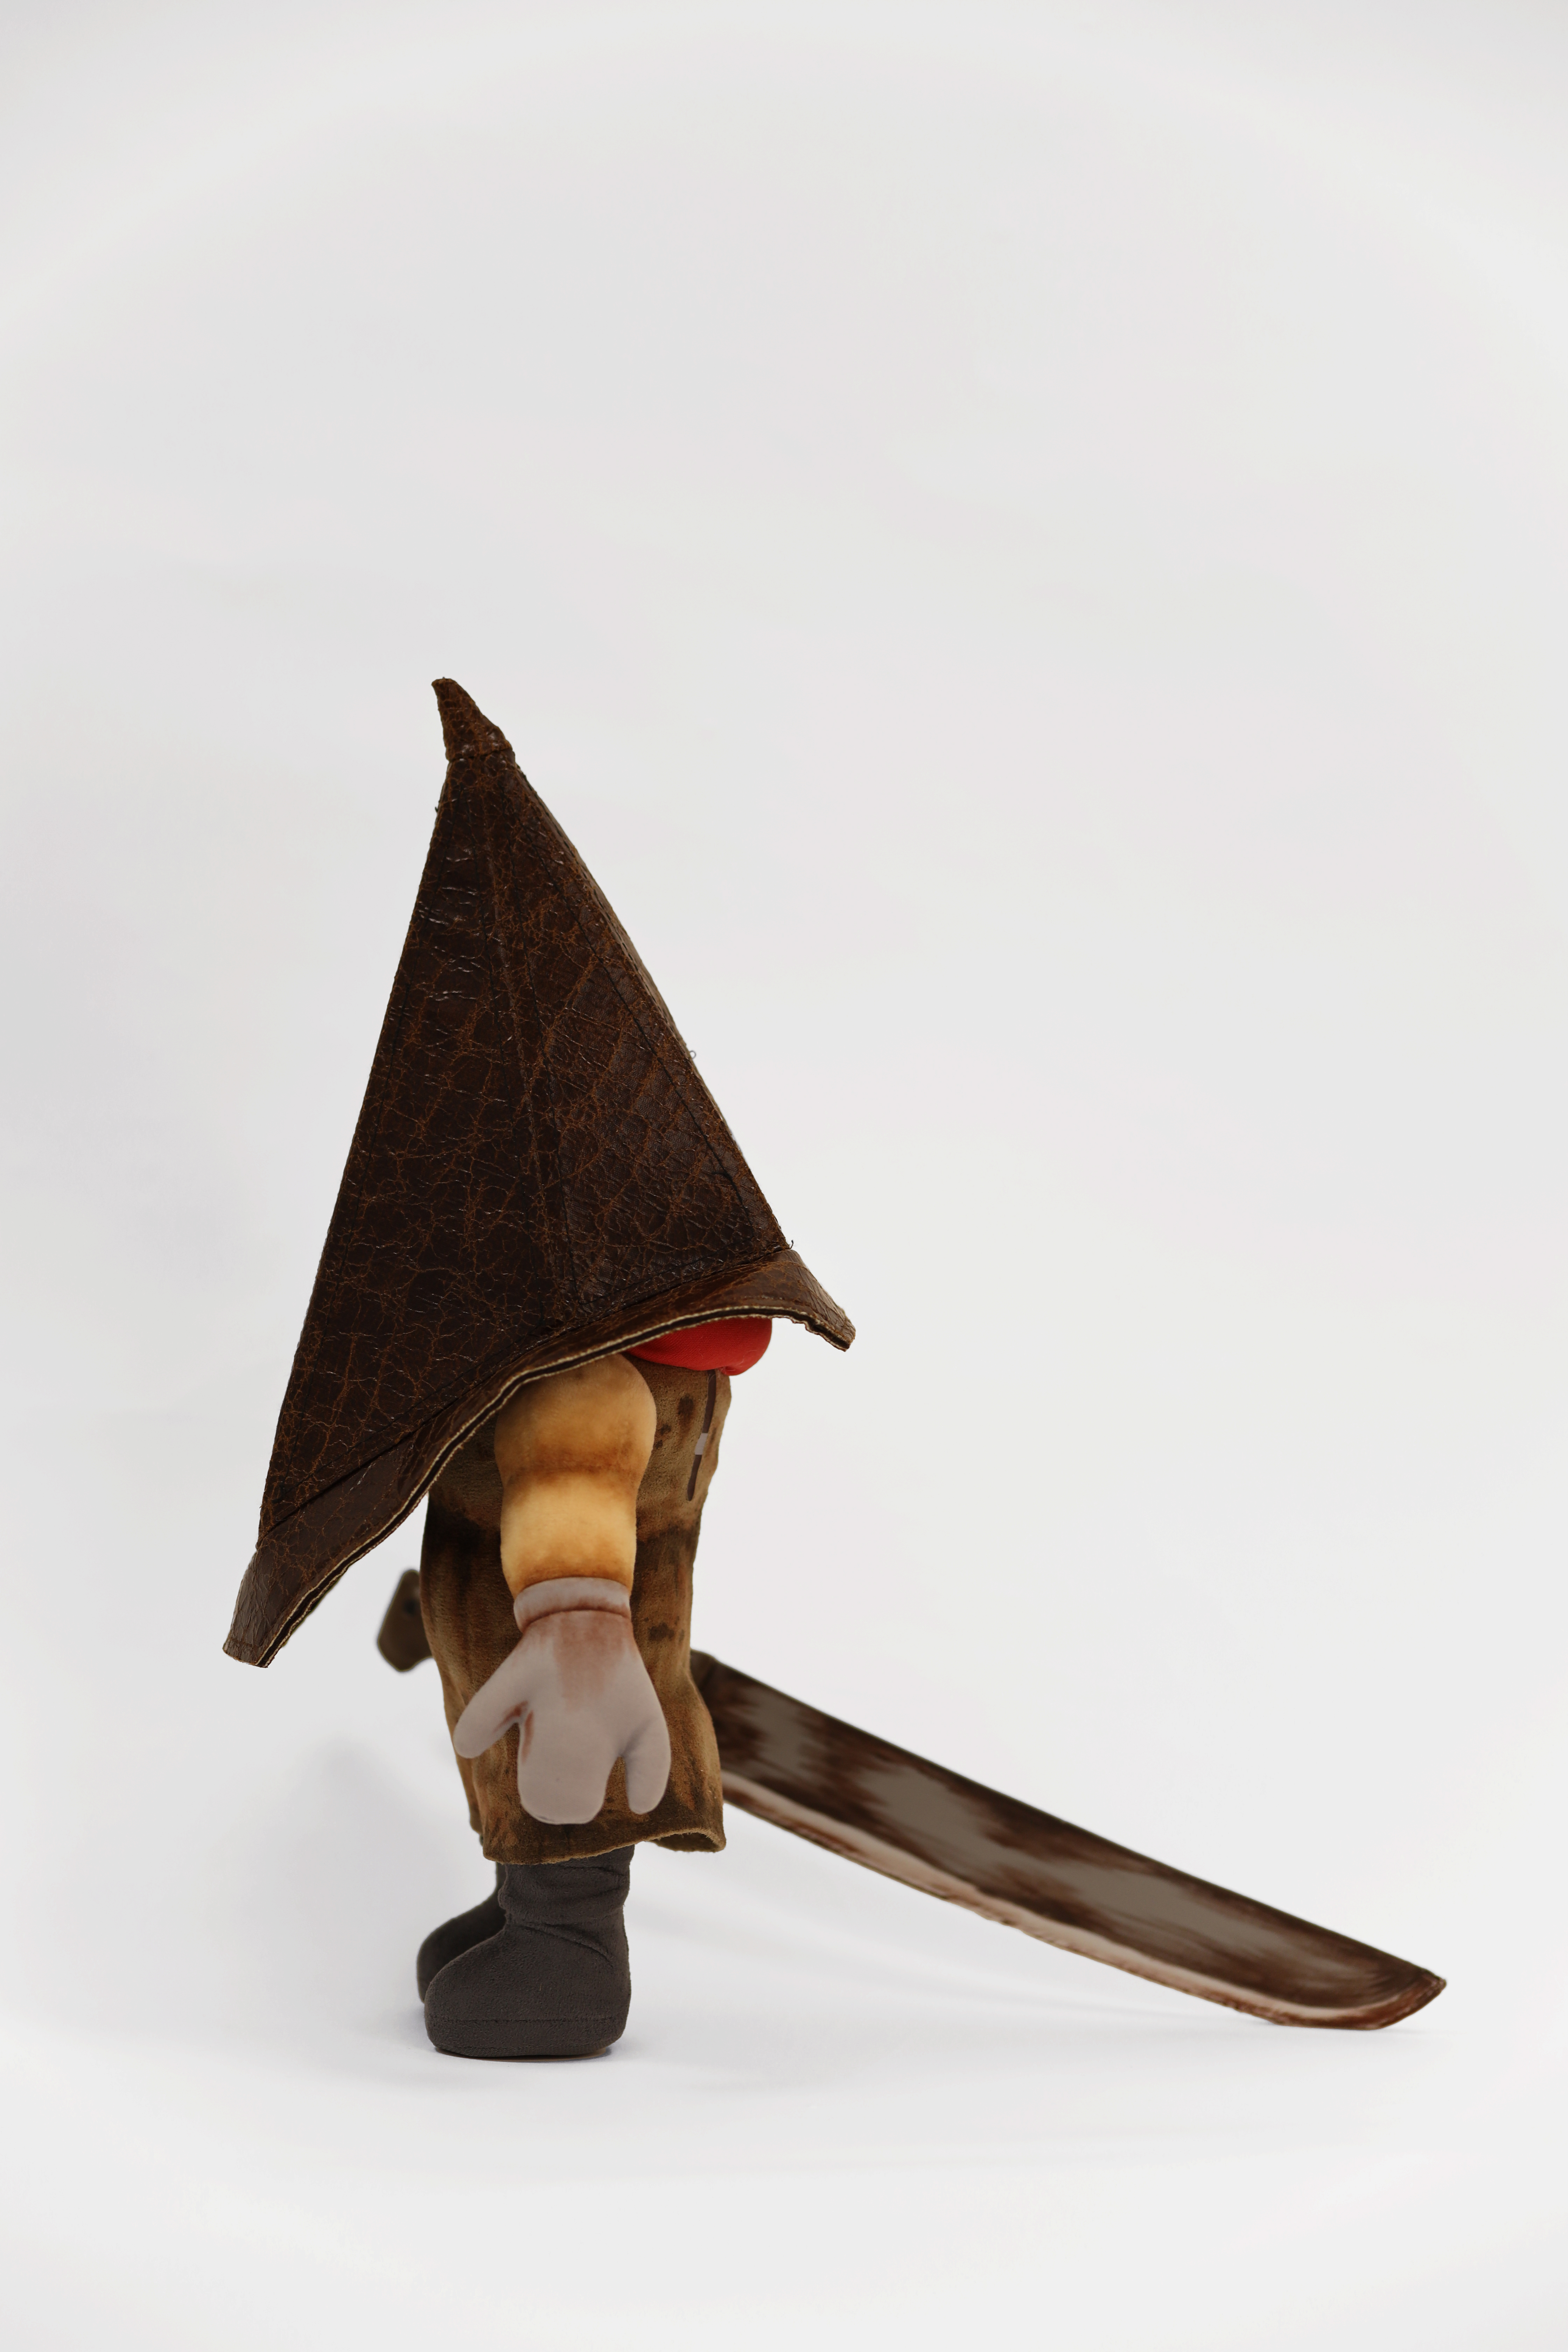 Silent Hill 2 goes all cute with this Pyramid Head plush